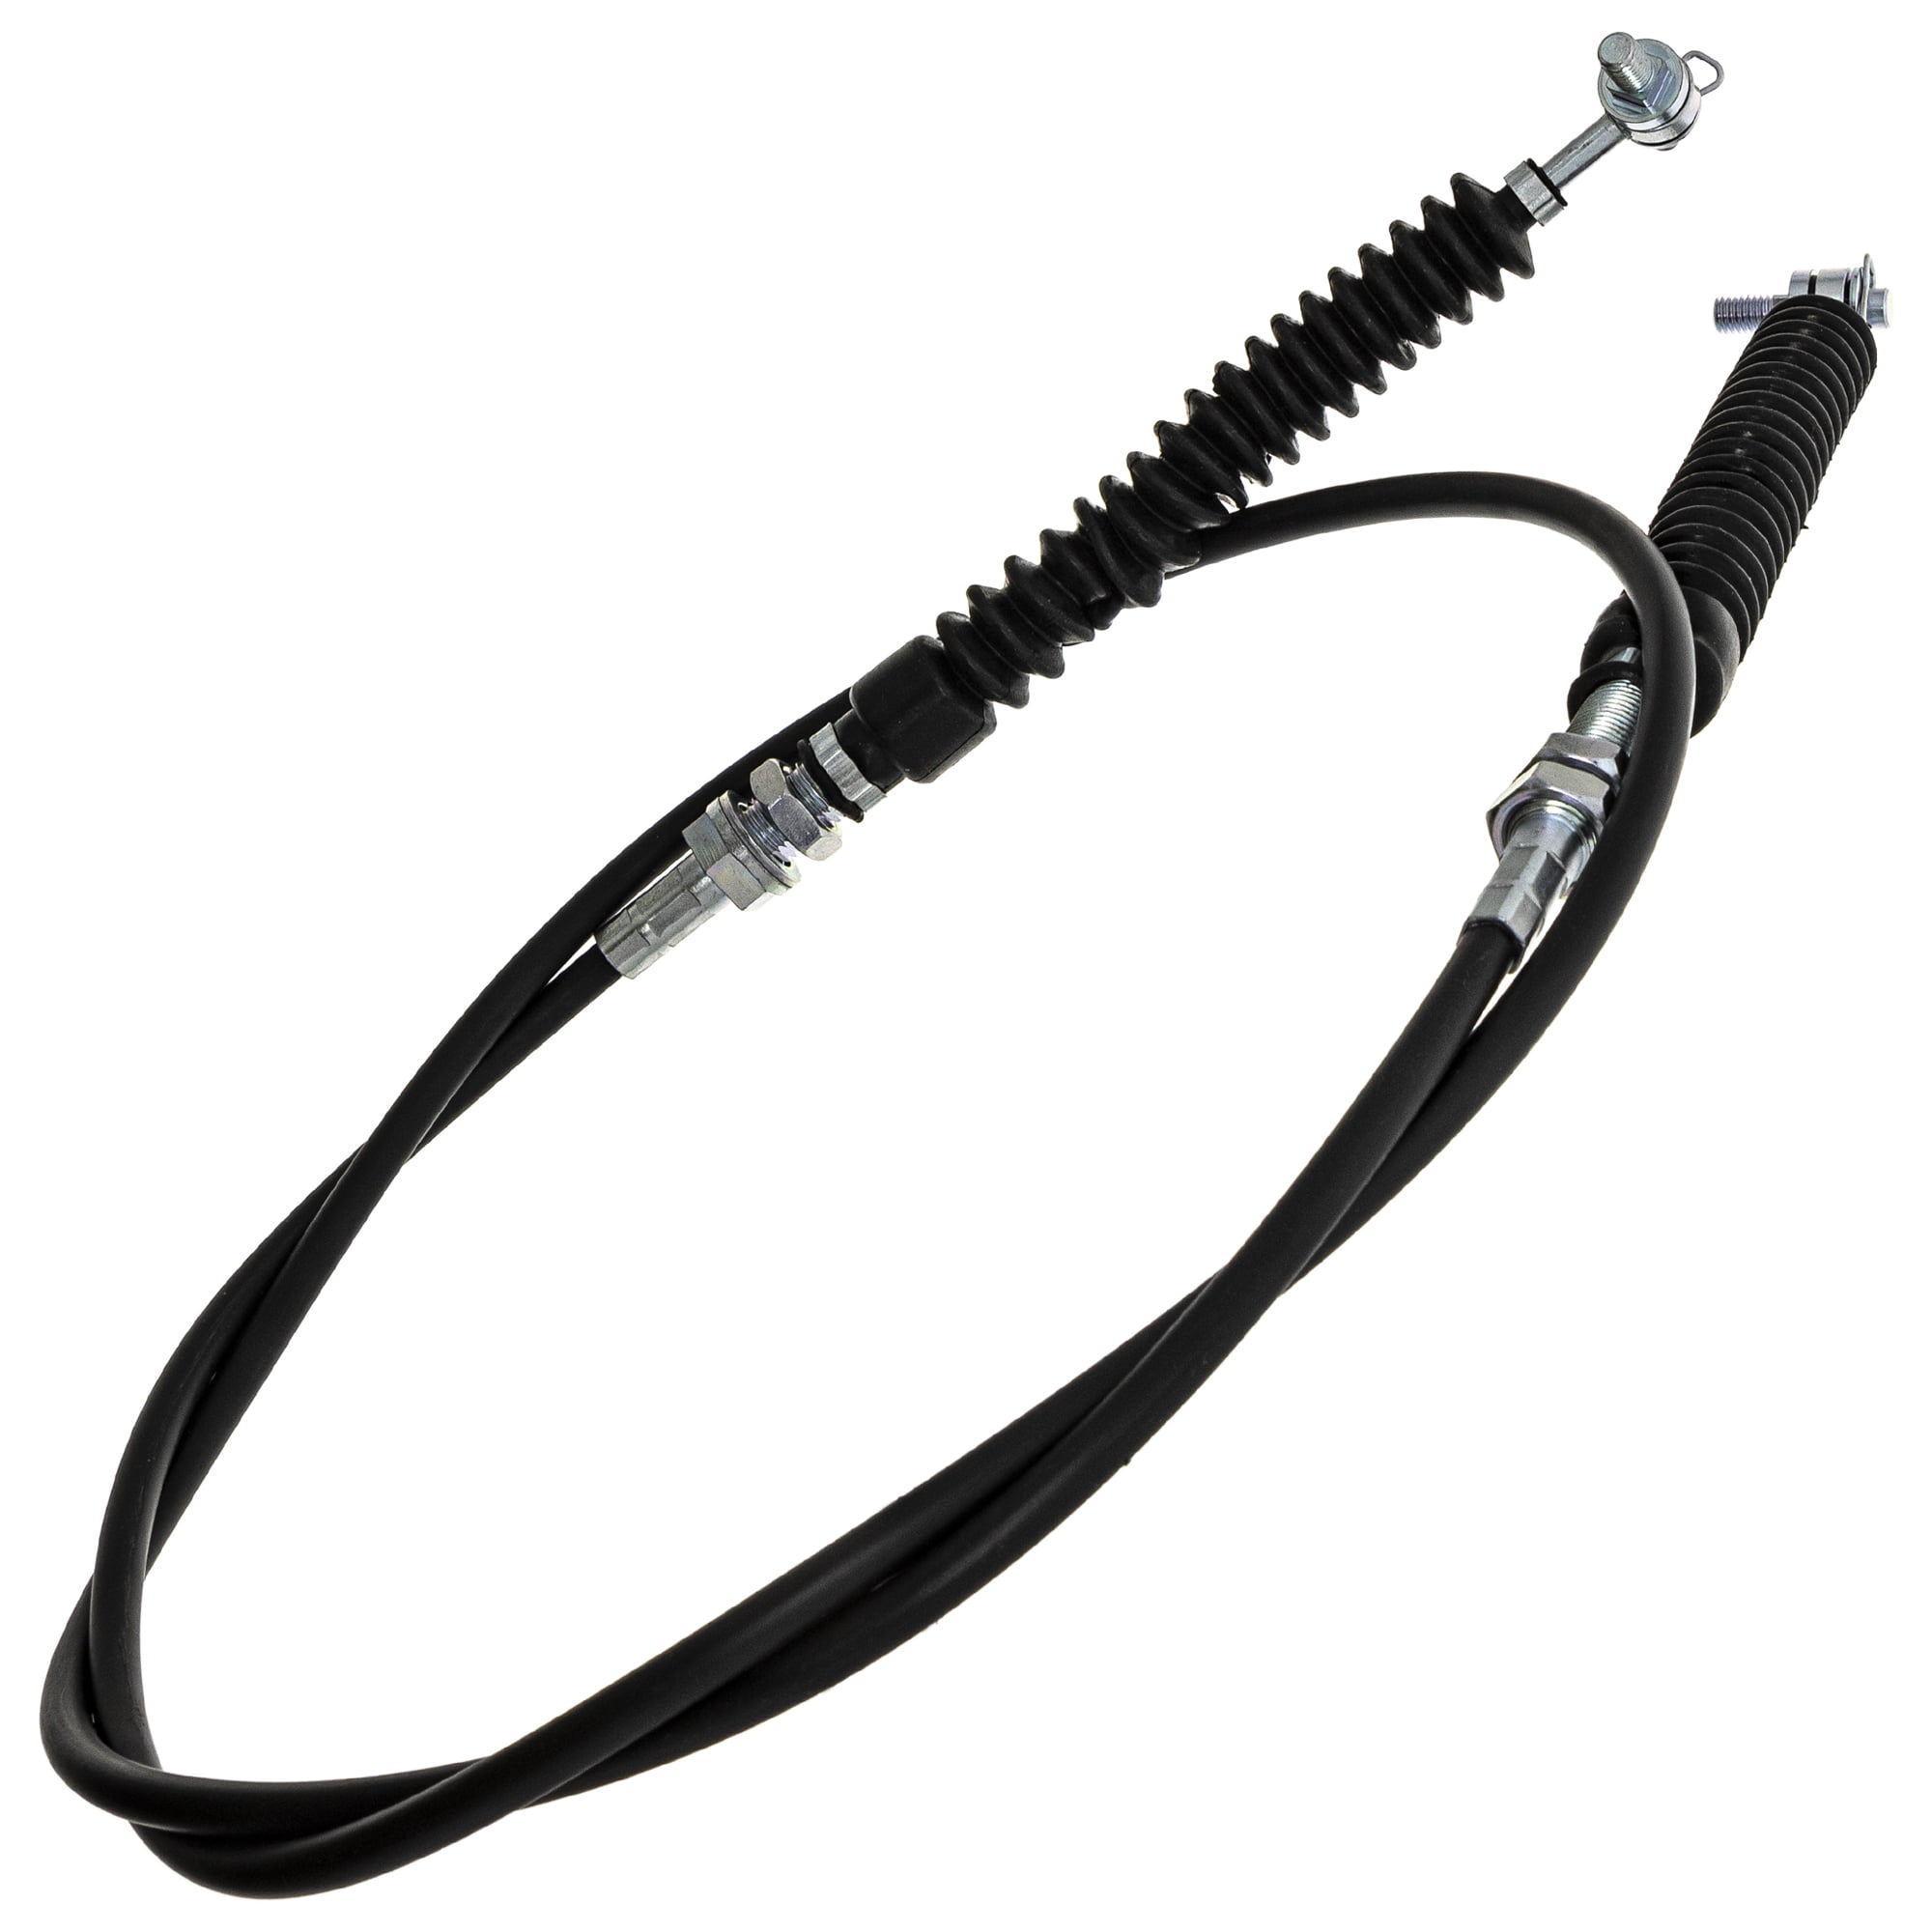 See Description For Full Fitment; Includes XP EFI; Replaces 7081209 AUTOKAY 141354 Heavy Duty Gear Shift Selector Cable Fits for Select 2005-2010 Polaris Ranger 500 & 700 